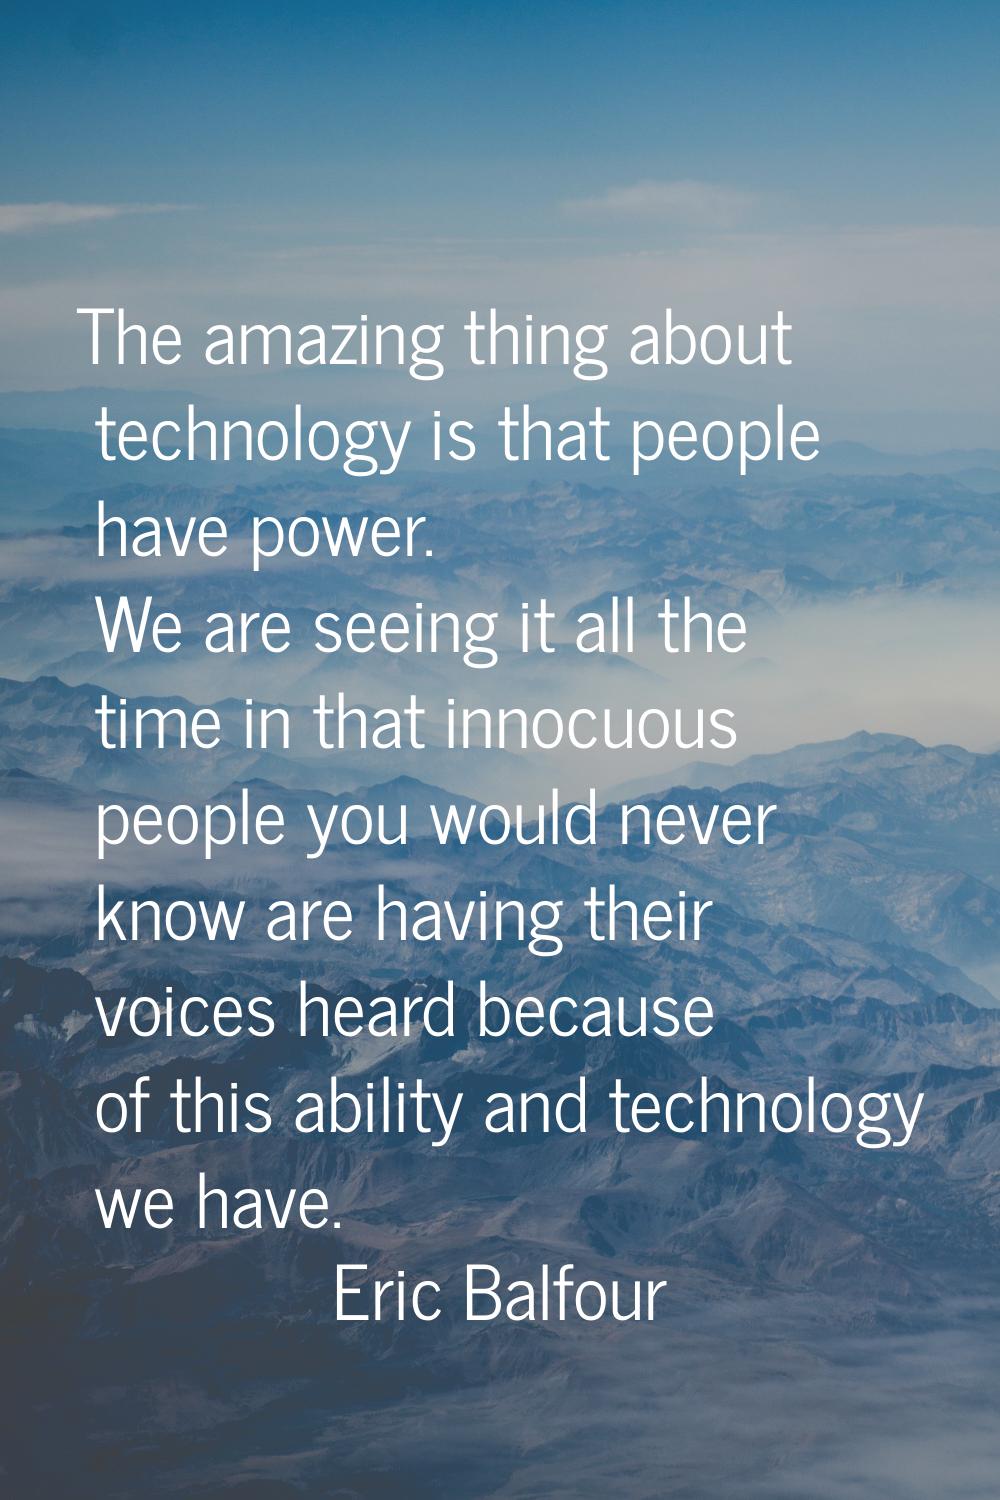 The amazing thing about technology is that people have power. We are seeing it all the time in that